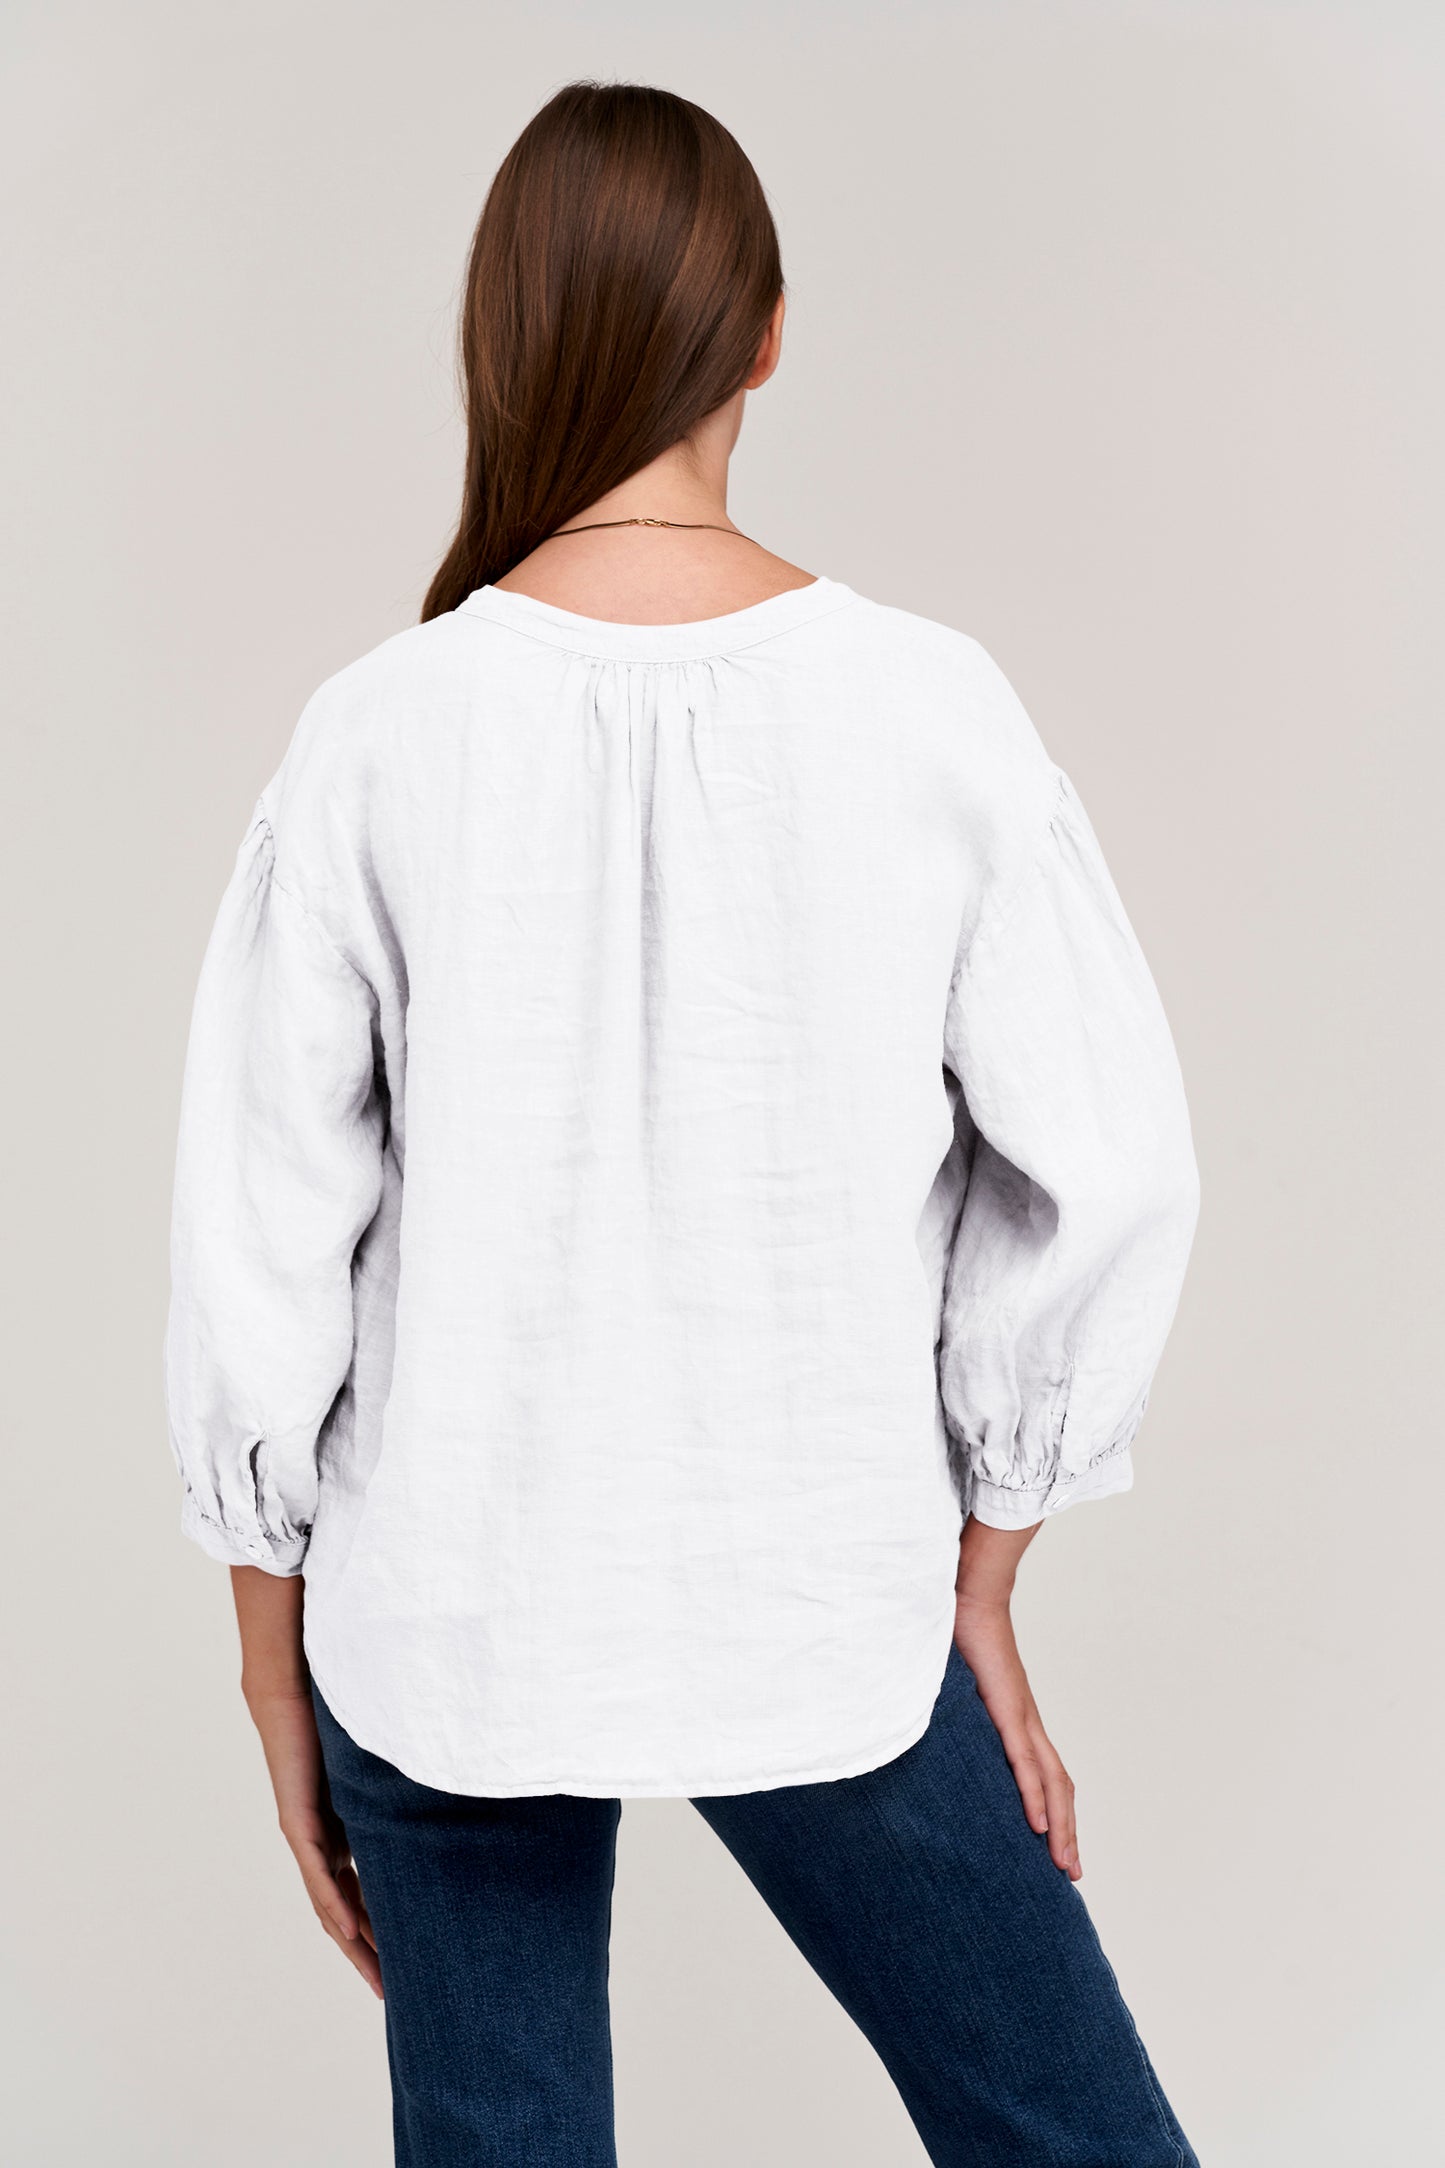 MATEA WOVEN LINEN BUTTON UP BLOUSE IN WHITE